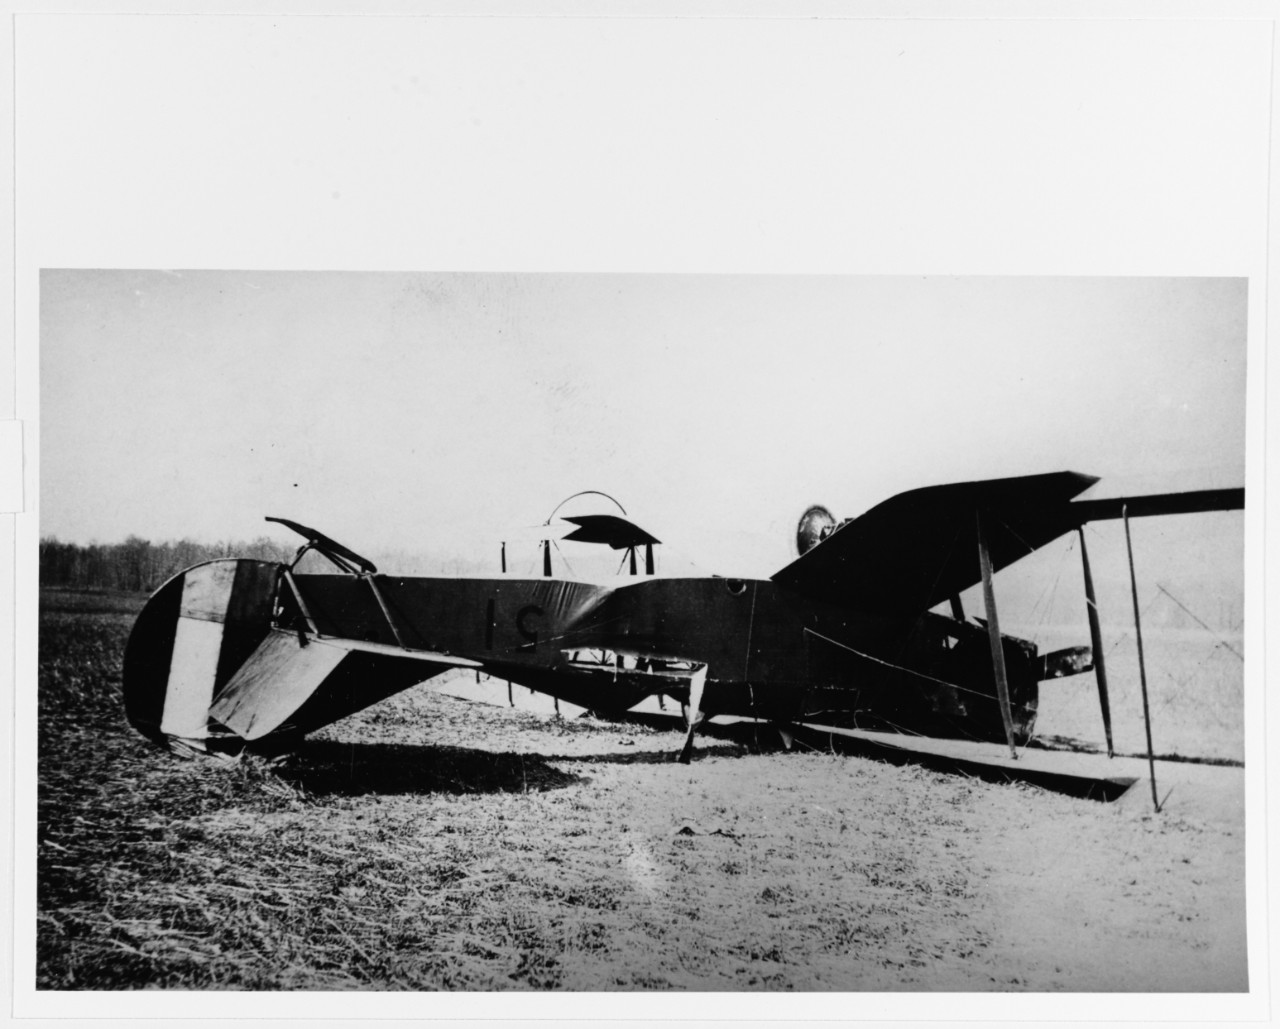 Wrecked Curtiss "R" type airplane